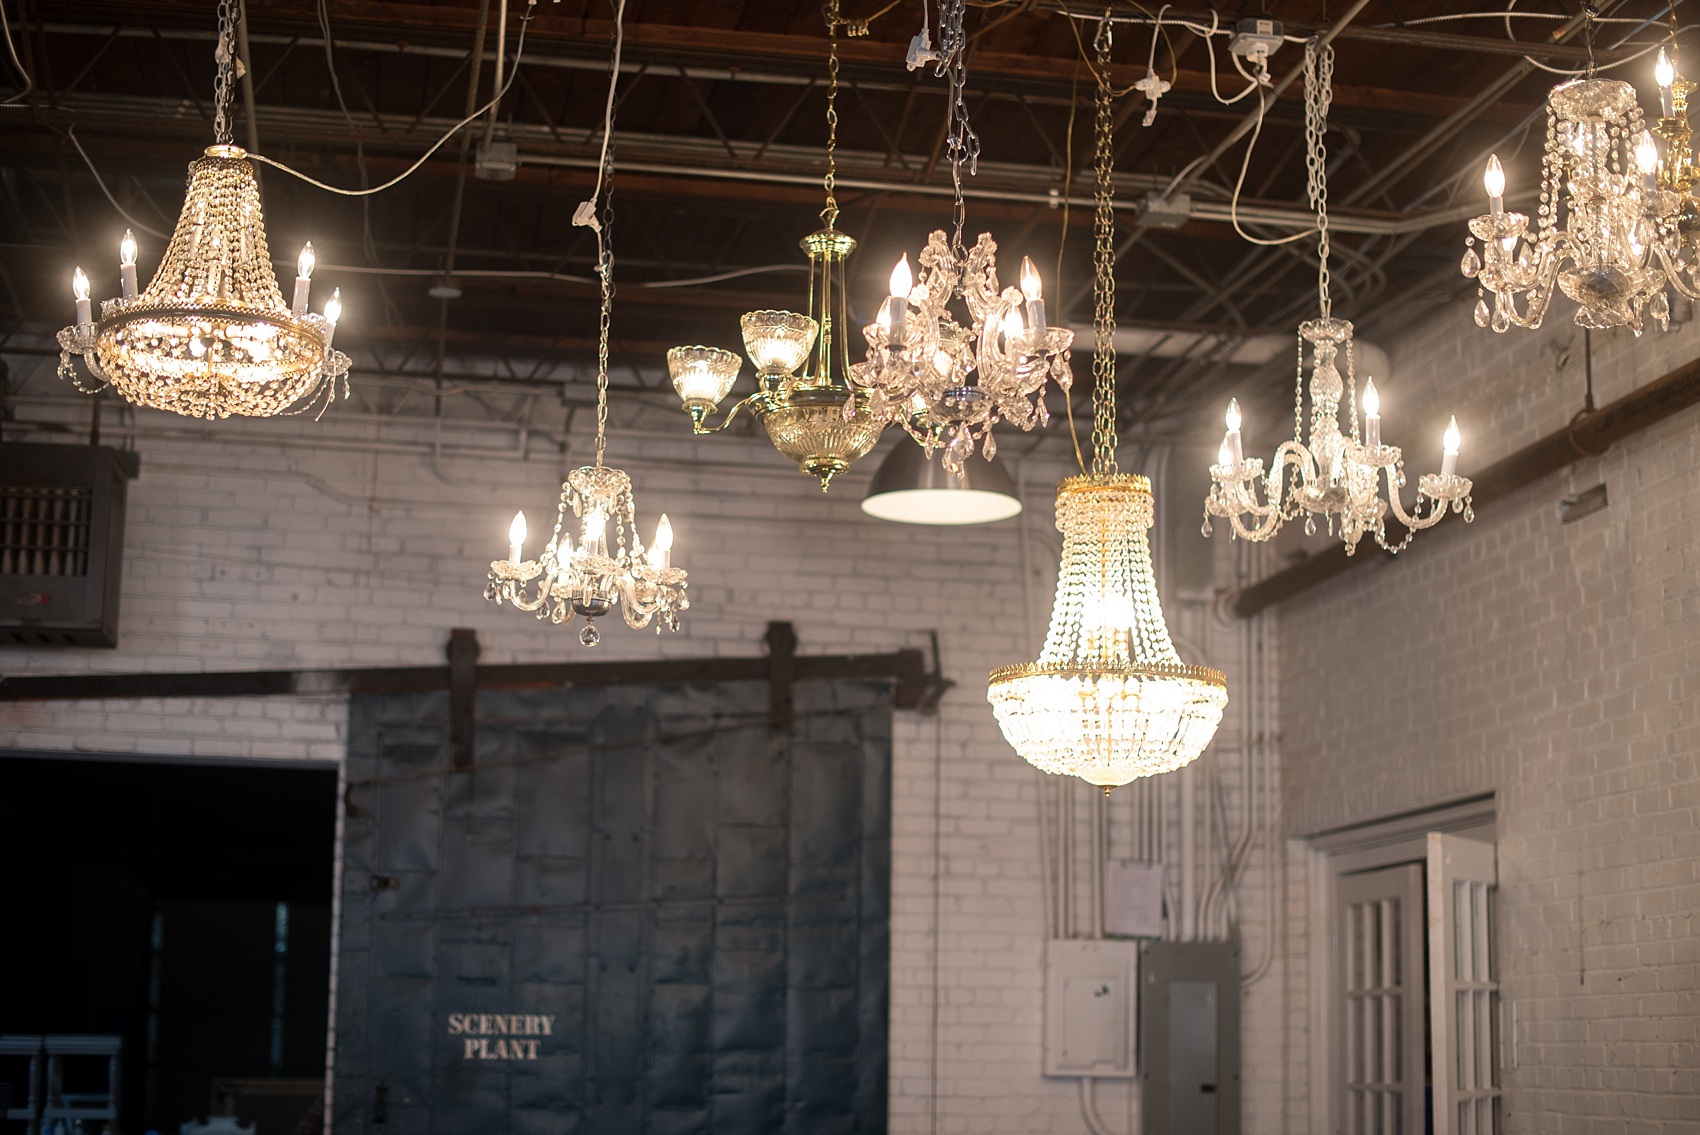 Mikkel Paige Photography photos of vintage furniture renal company Paisley and Jade in Richmond, Virginia. A variety of chandeliers.